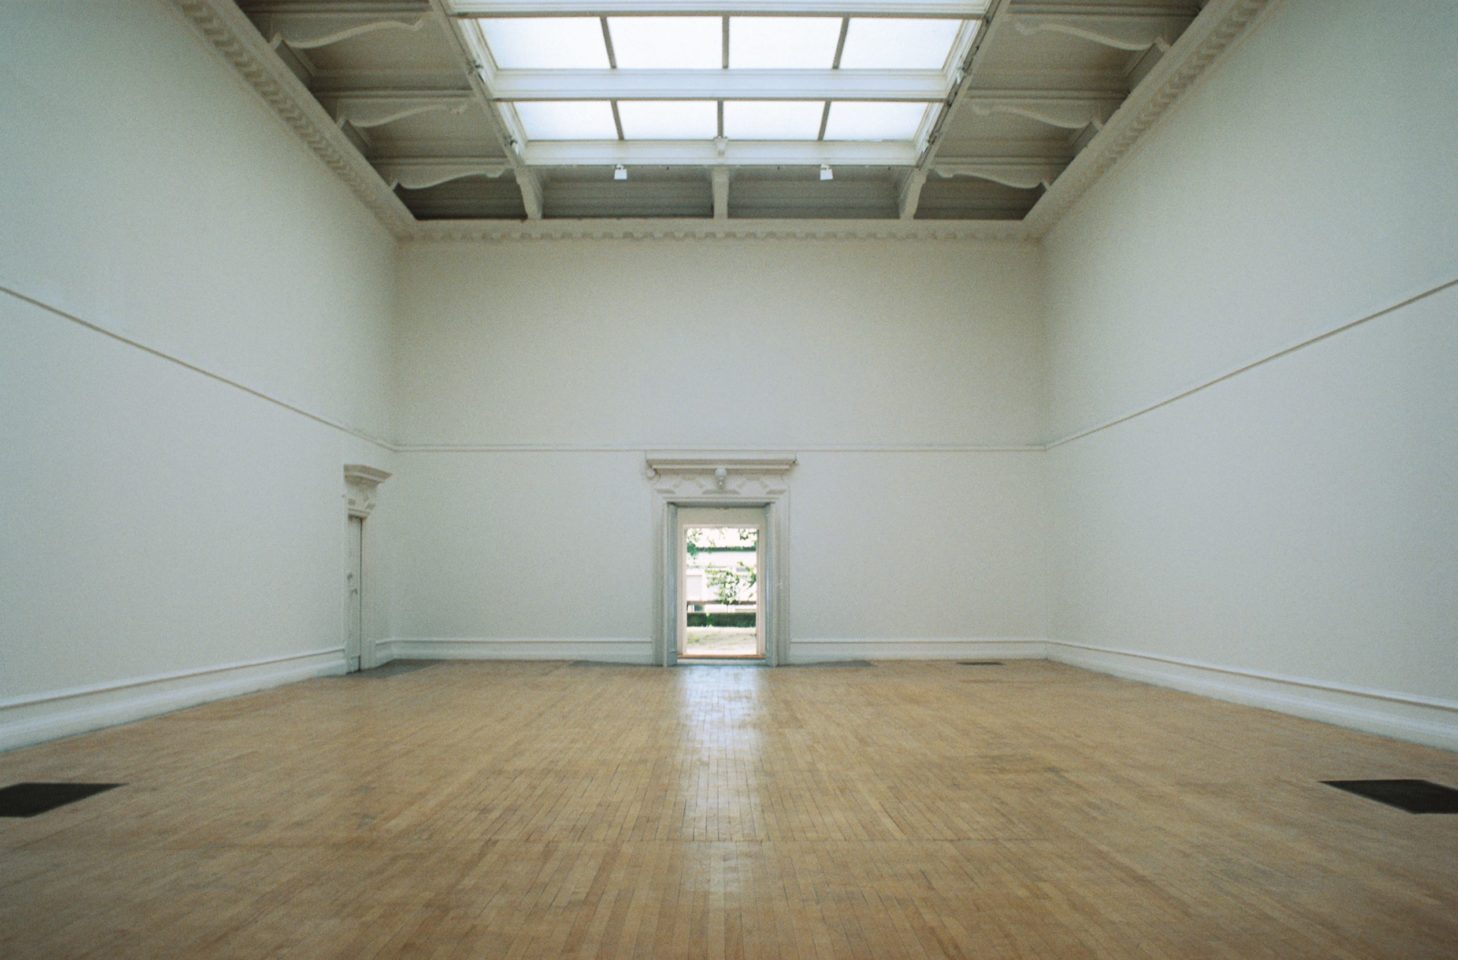 Image of the South London Gallery's main gallery with Cornford & Cross' art work positioned on the floor